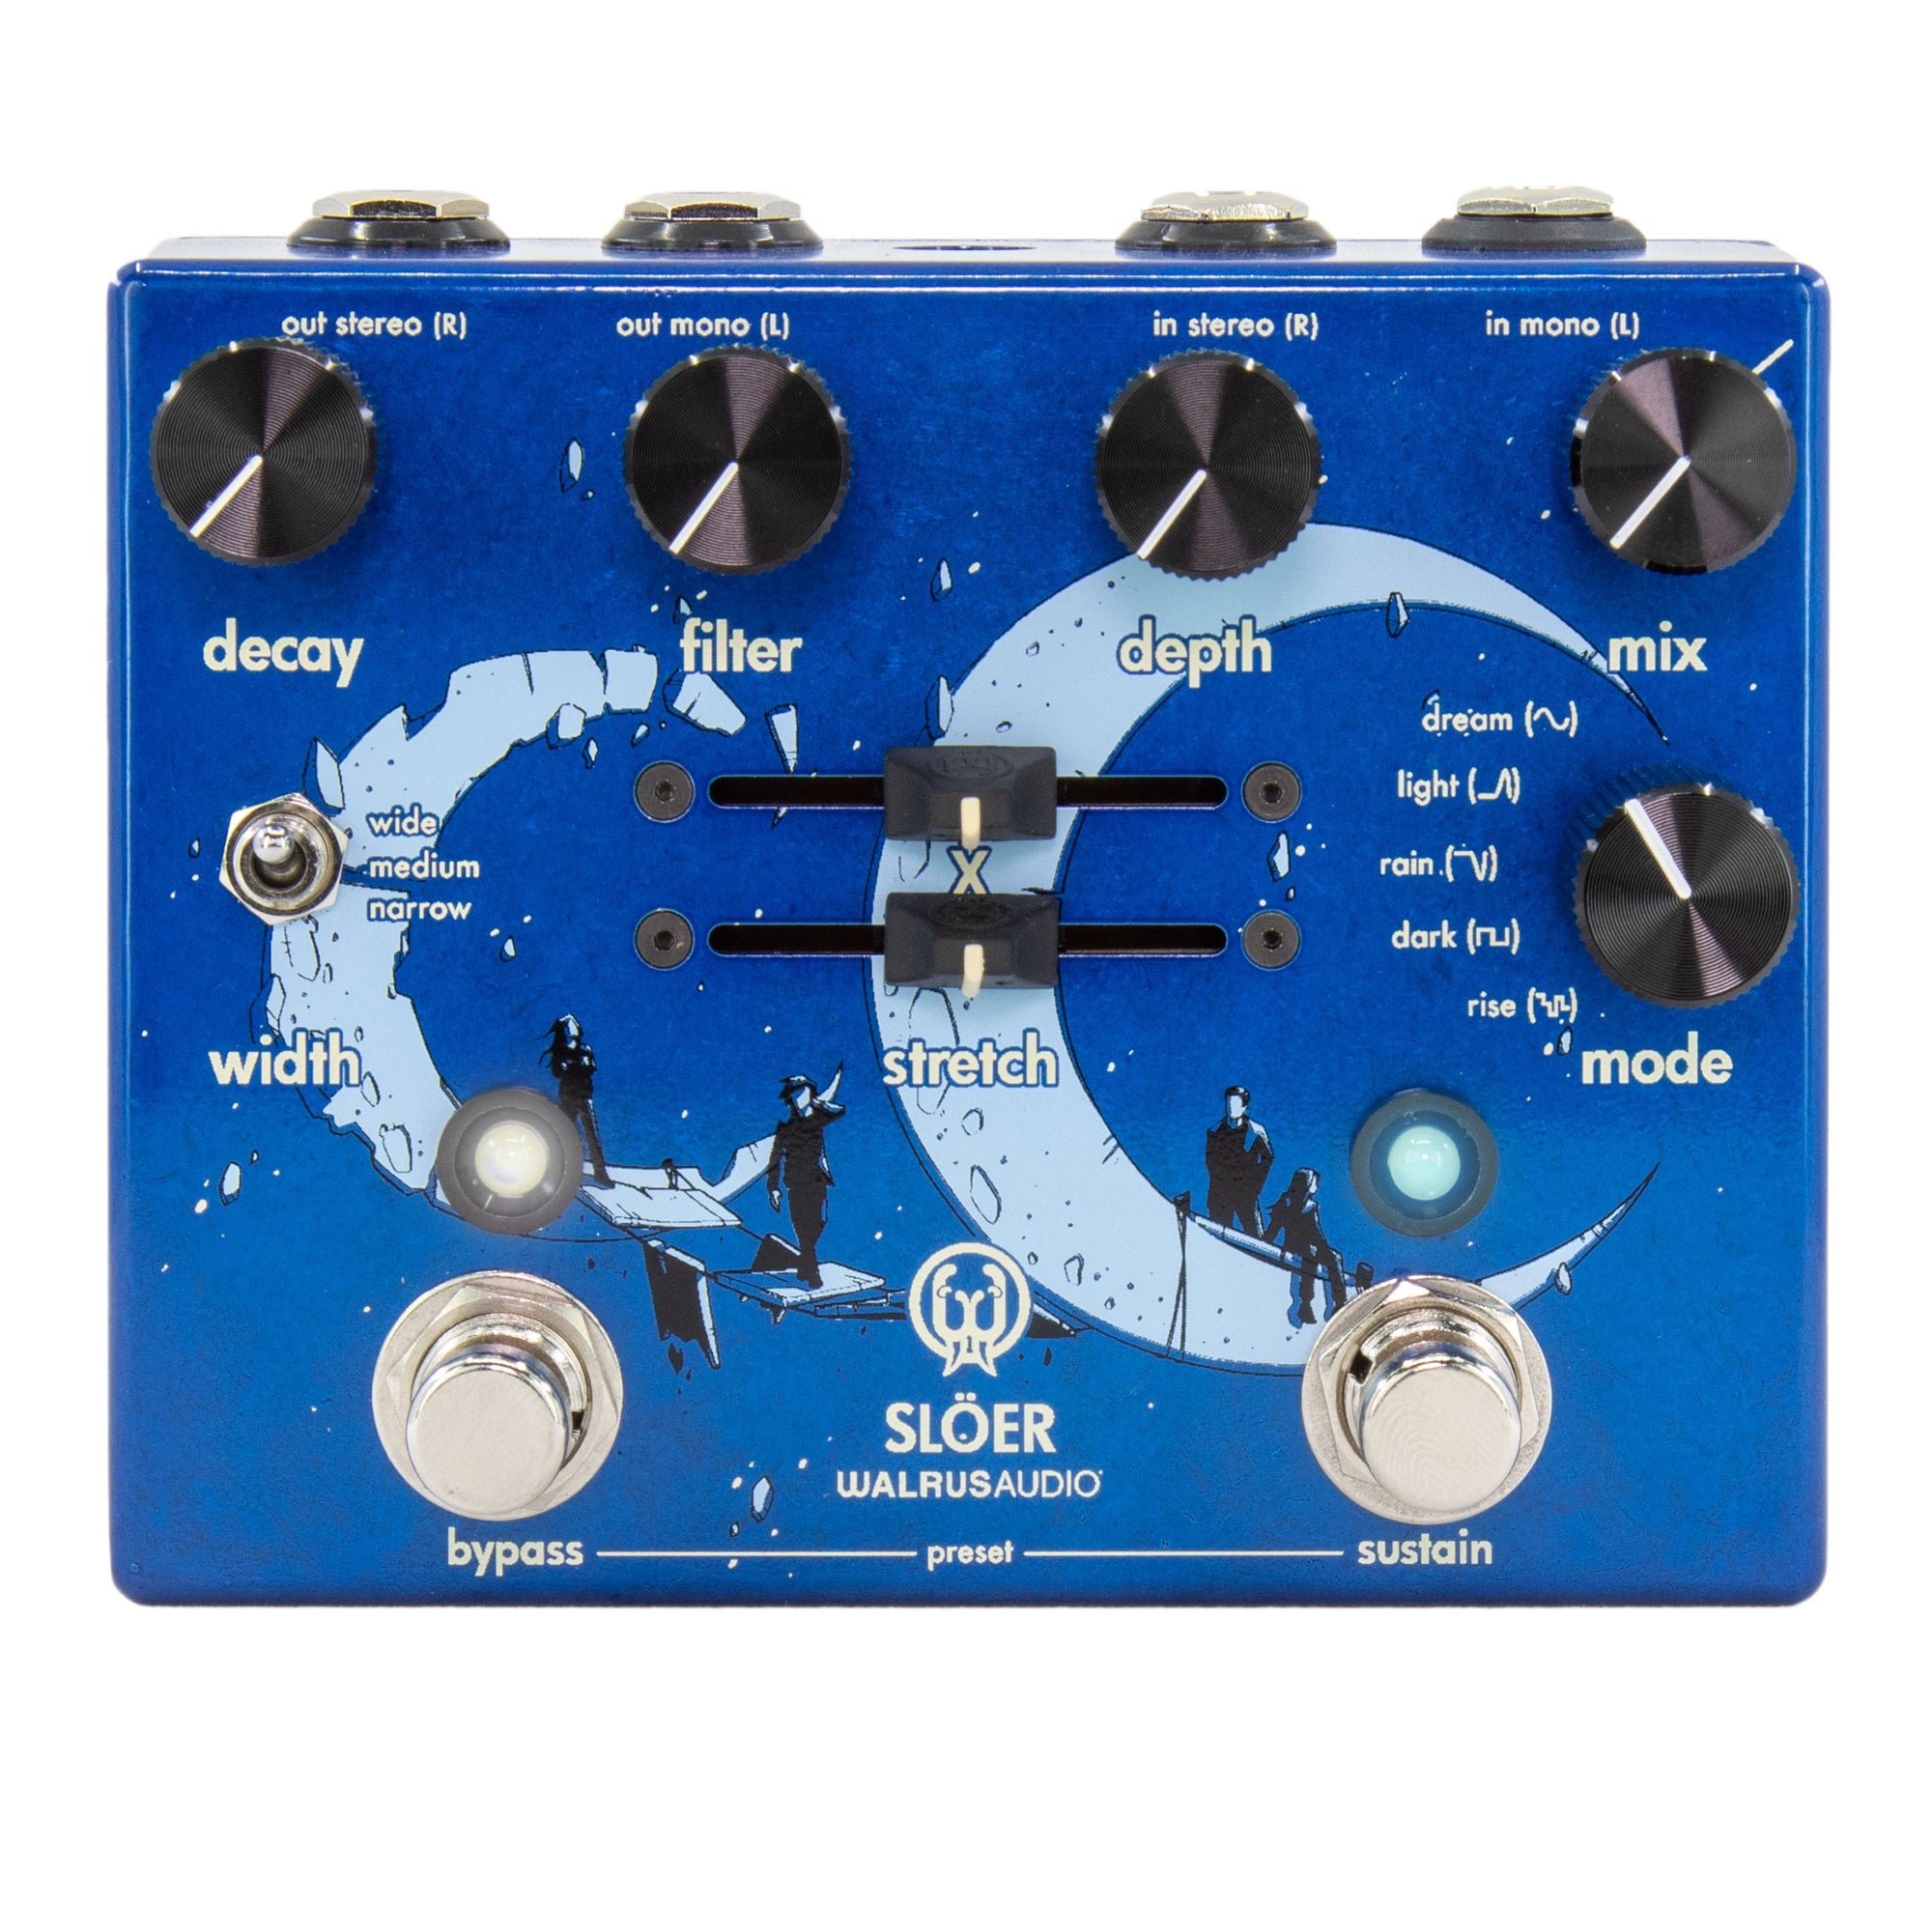 Walrus Audio SLÖER Stereo Ambient Reverb - Blue